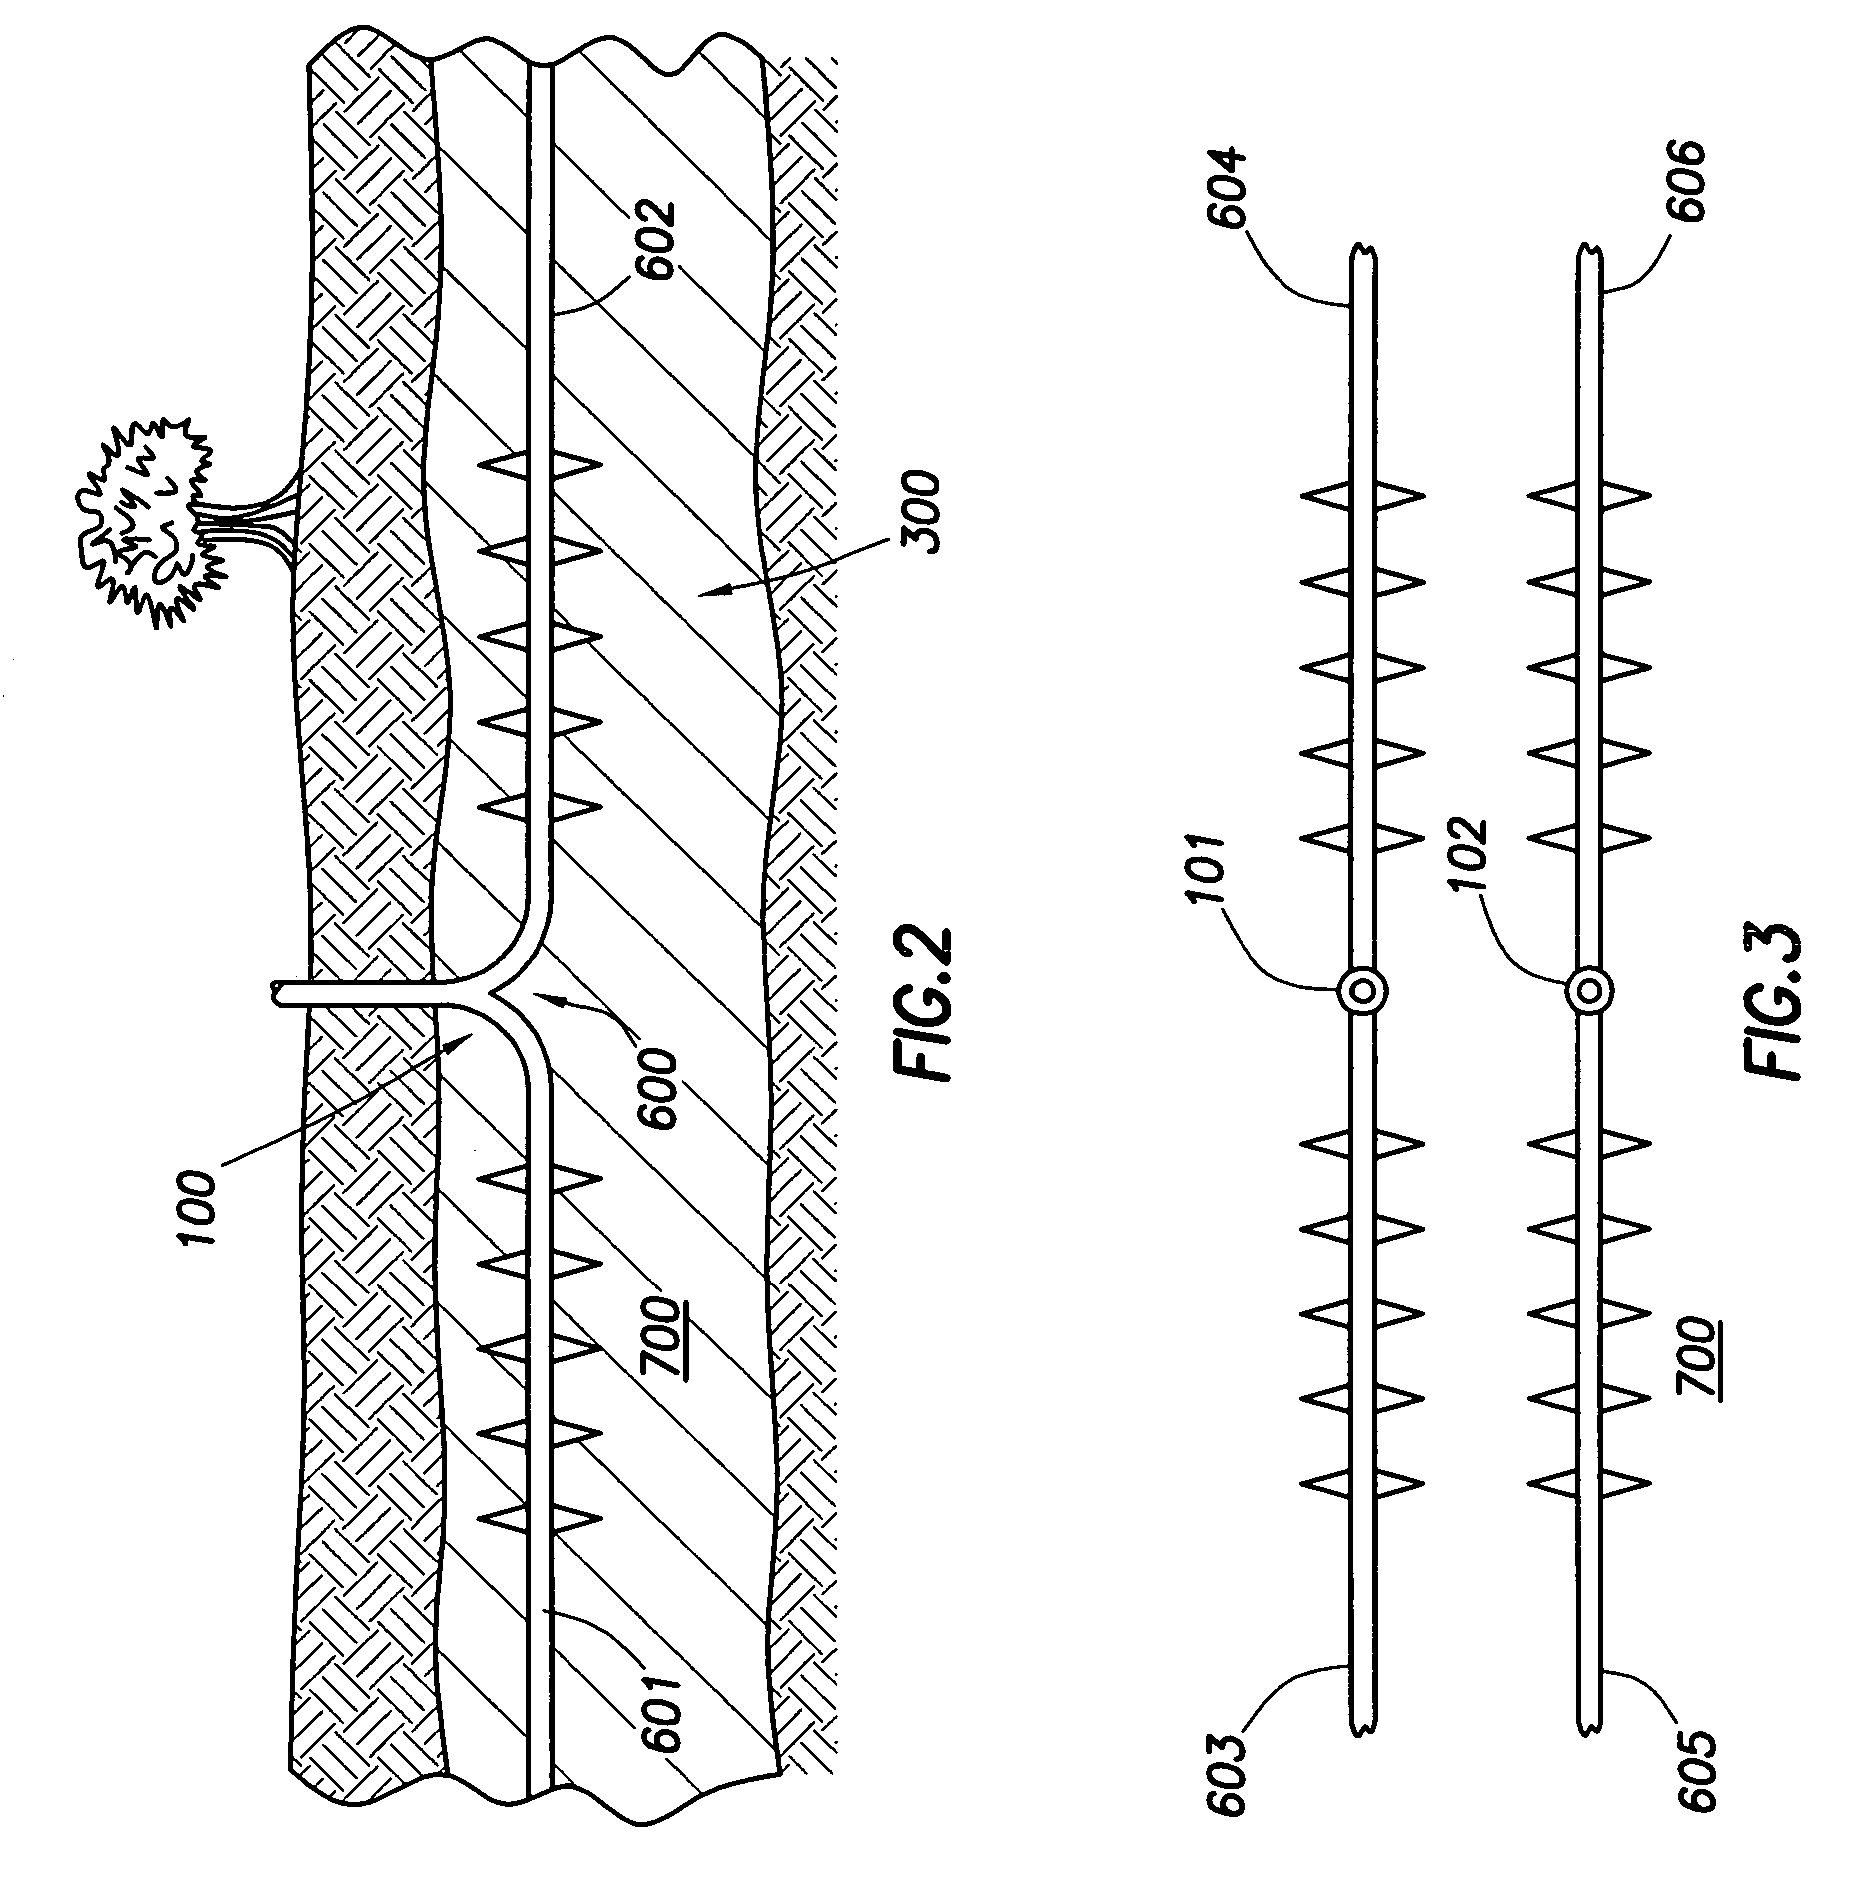 Method of optimizing production of gas from subterranean formations